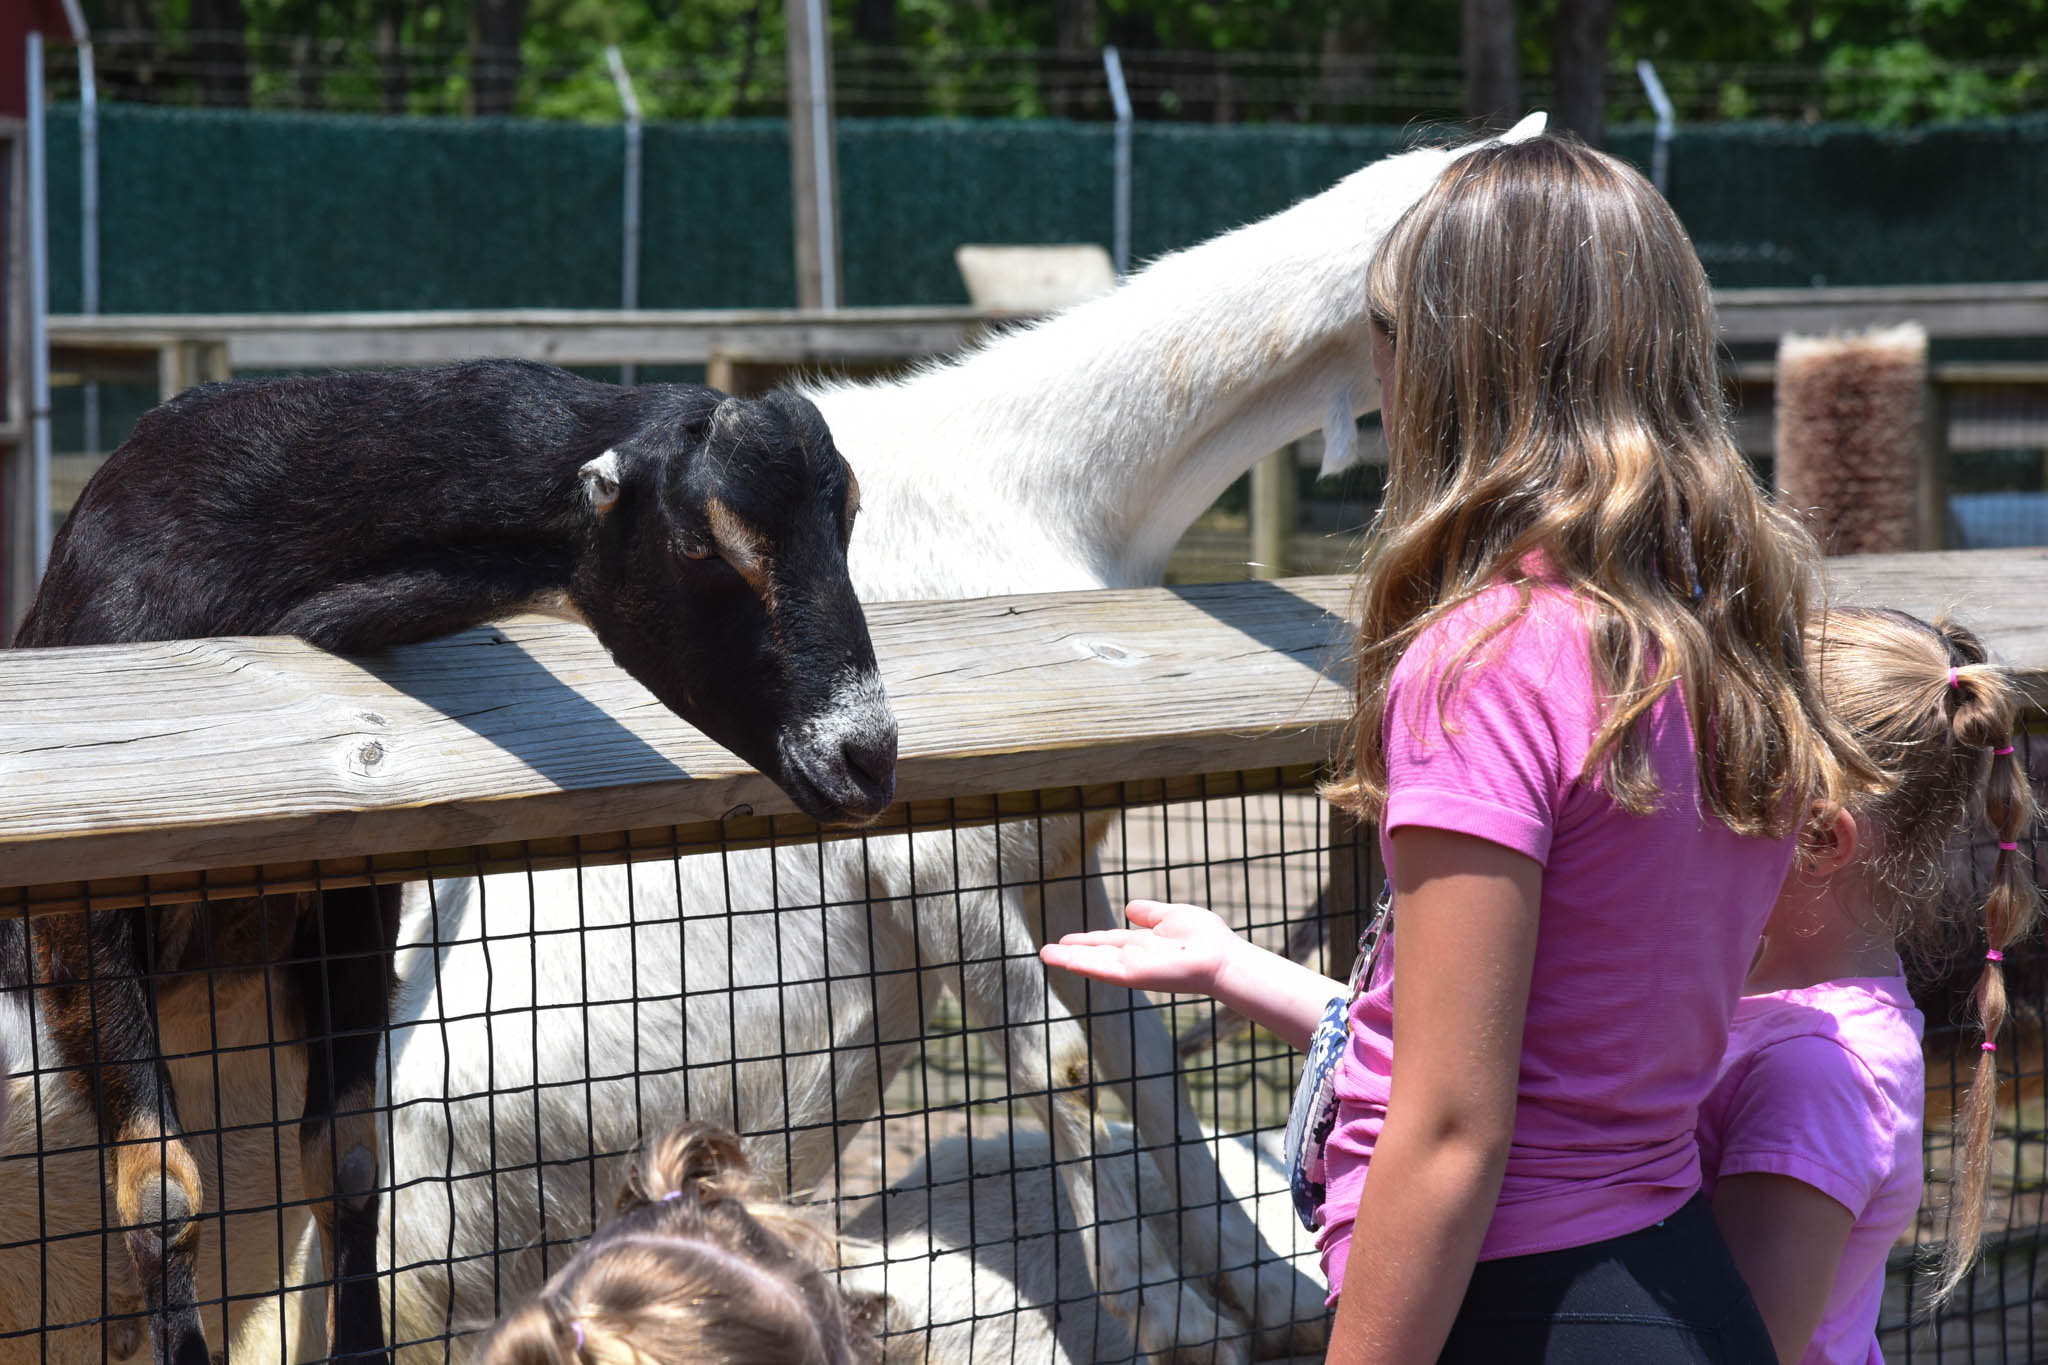 Kids feeding the goats at the Cape May County Zoo.